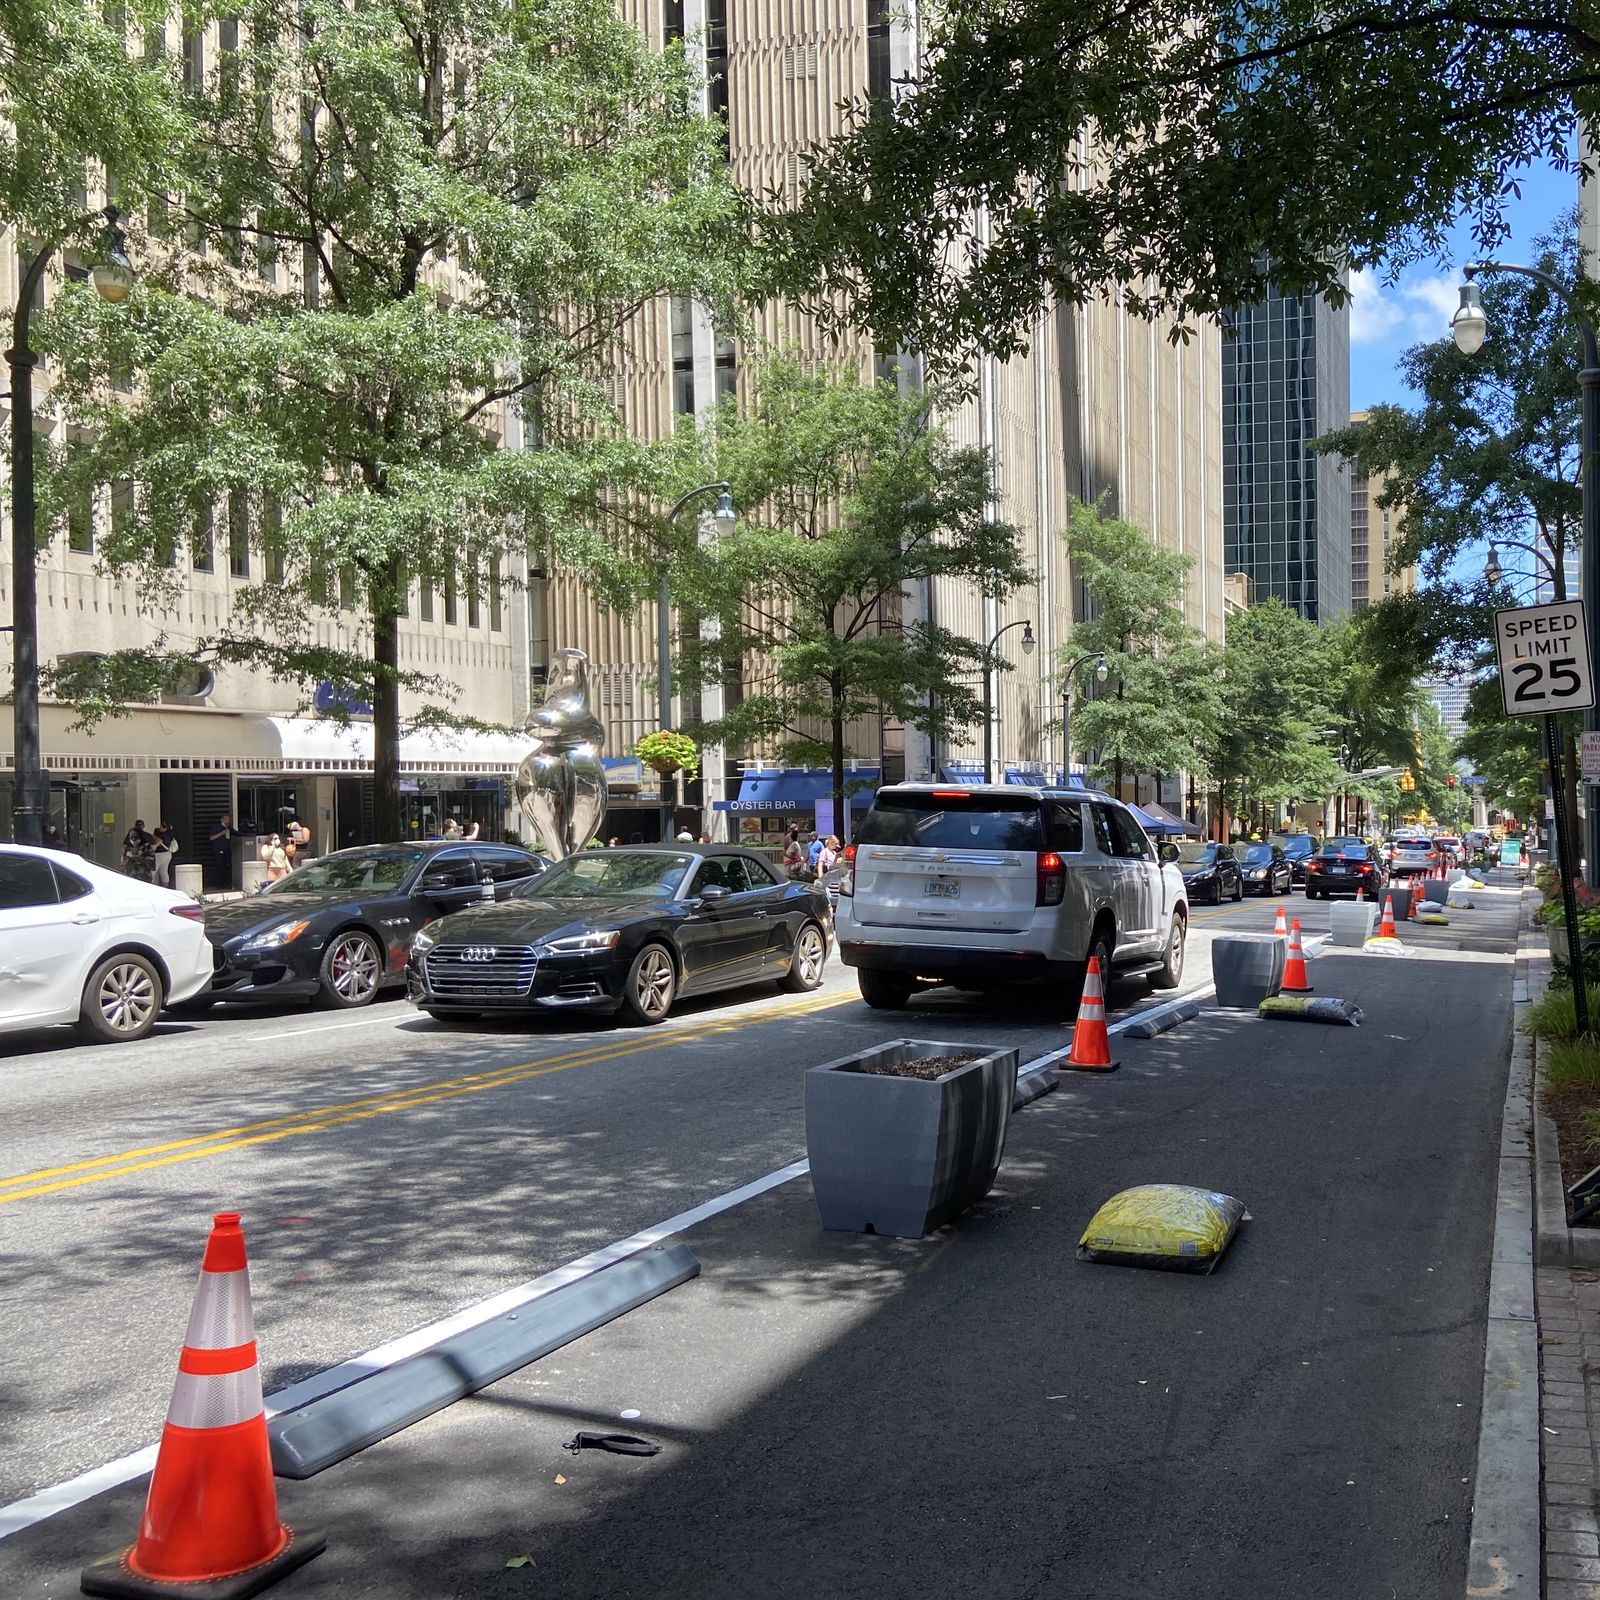 City plans to remove people-friendly project on Peachtree Street